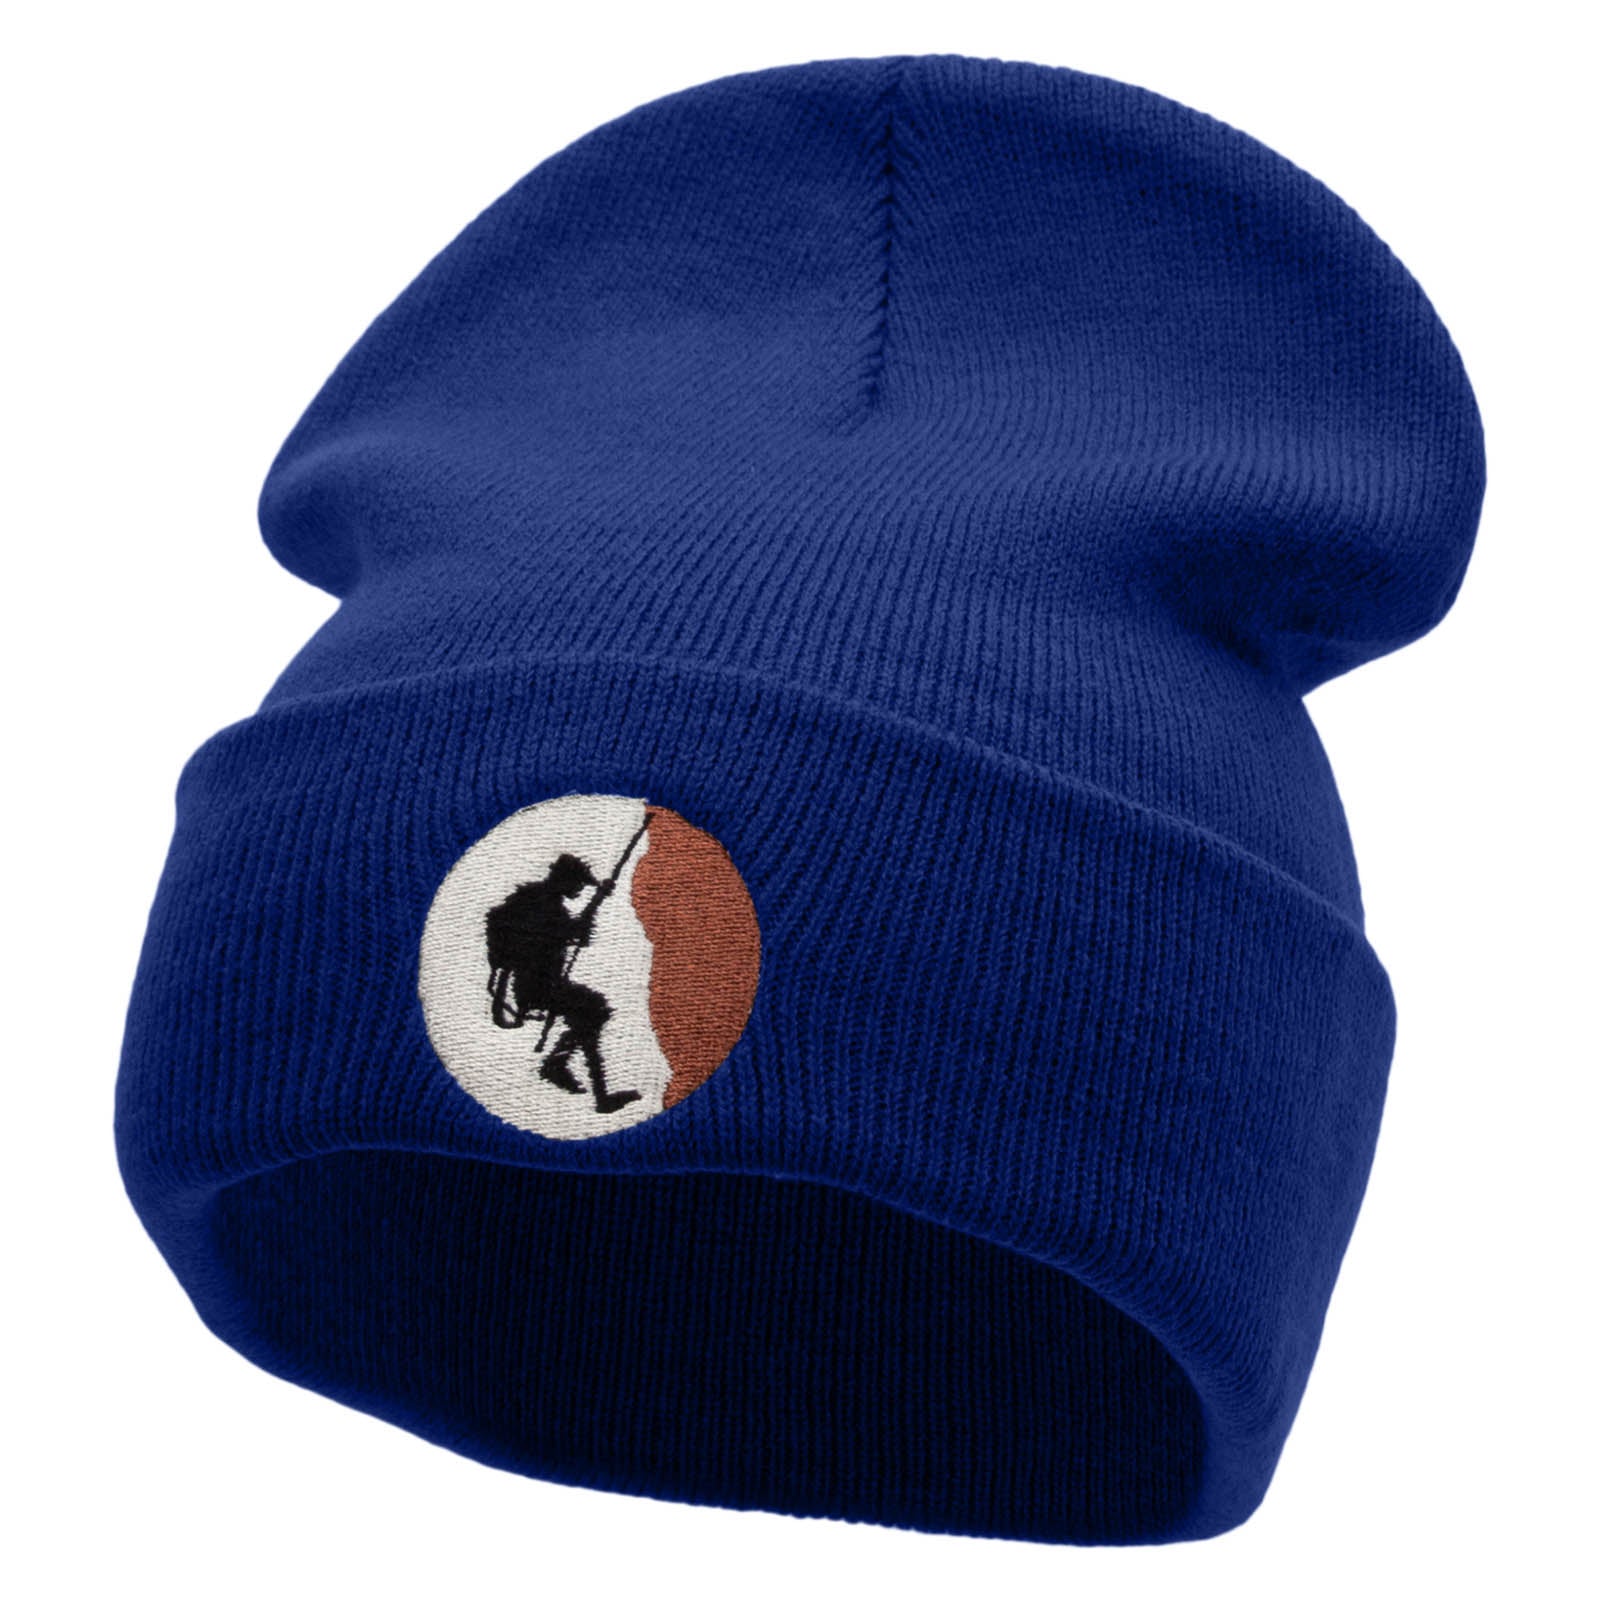 Rock Climbing Scene Embroidered 12 Inch Long Knitted Beanie - Royal OSFM